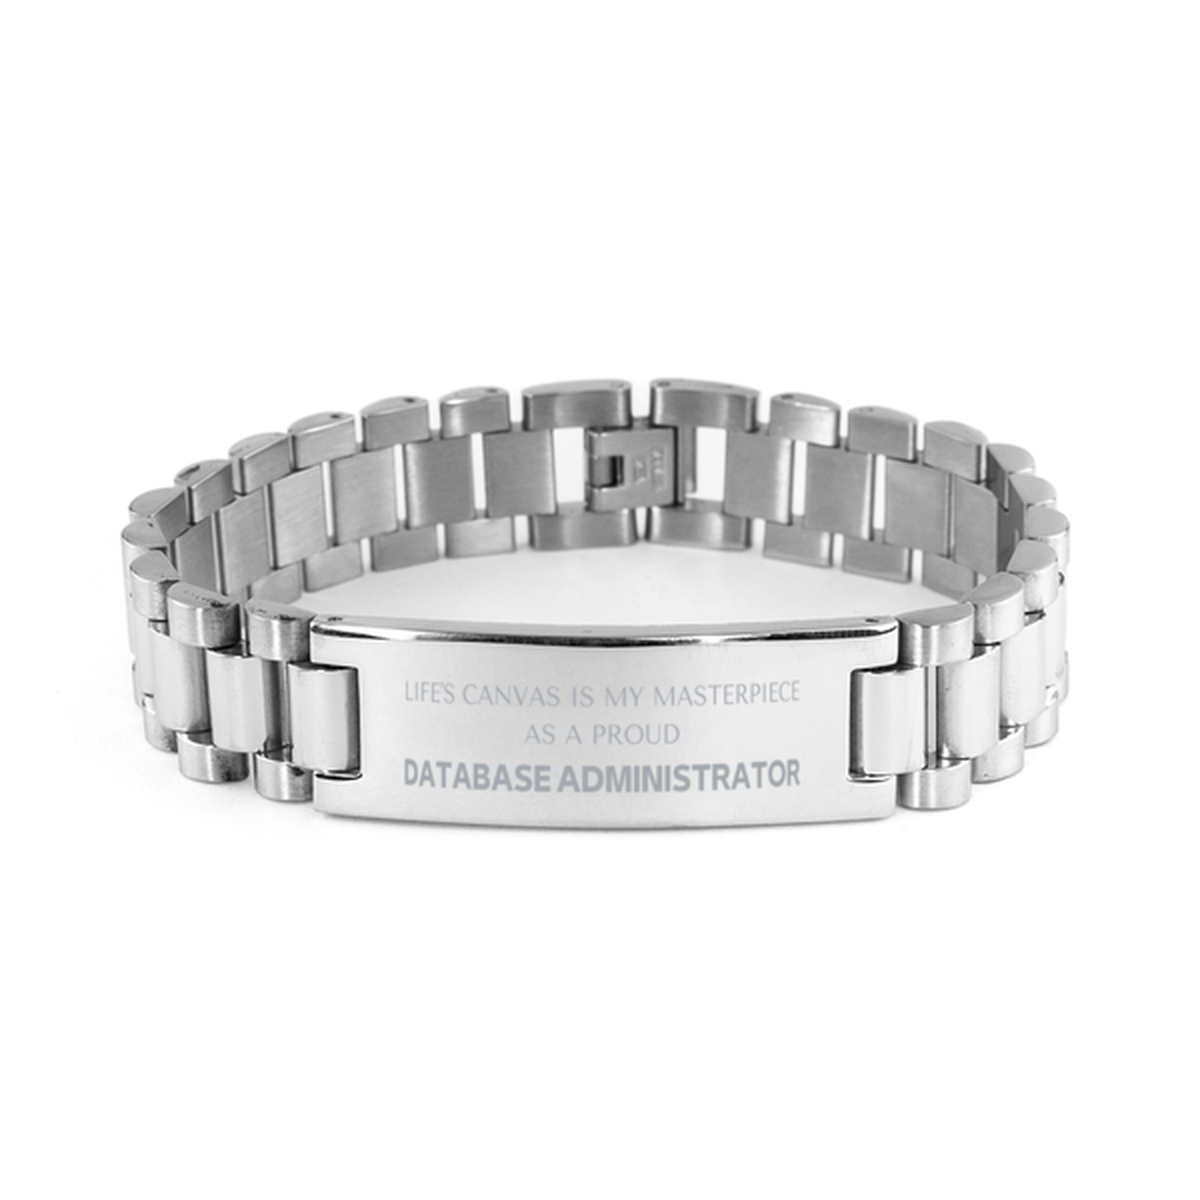 Proud Database Administrator Gifts, Life's canvas is my masterpiece, Epic Birthday Christmas Unique Ladder Stainless Steel Bracelet For Database Administrator, Coworkers, Men, Women, Friends